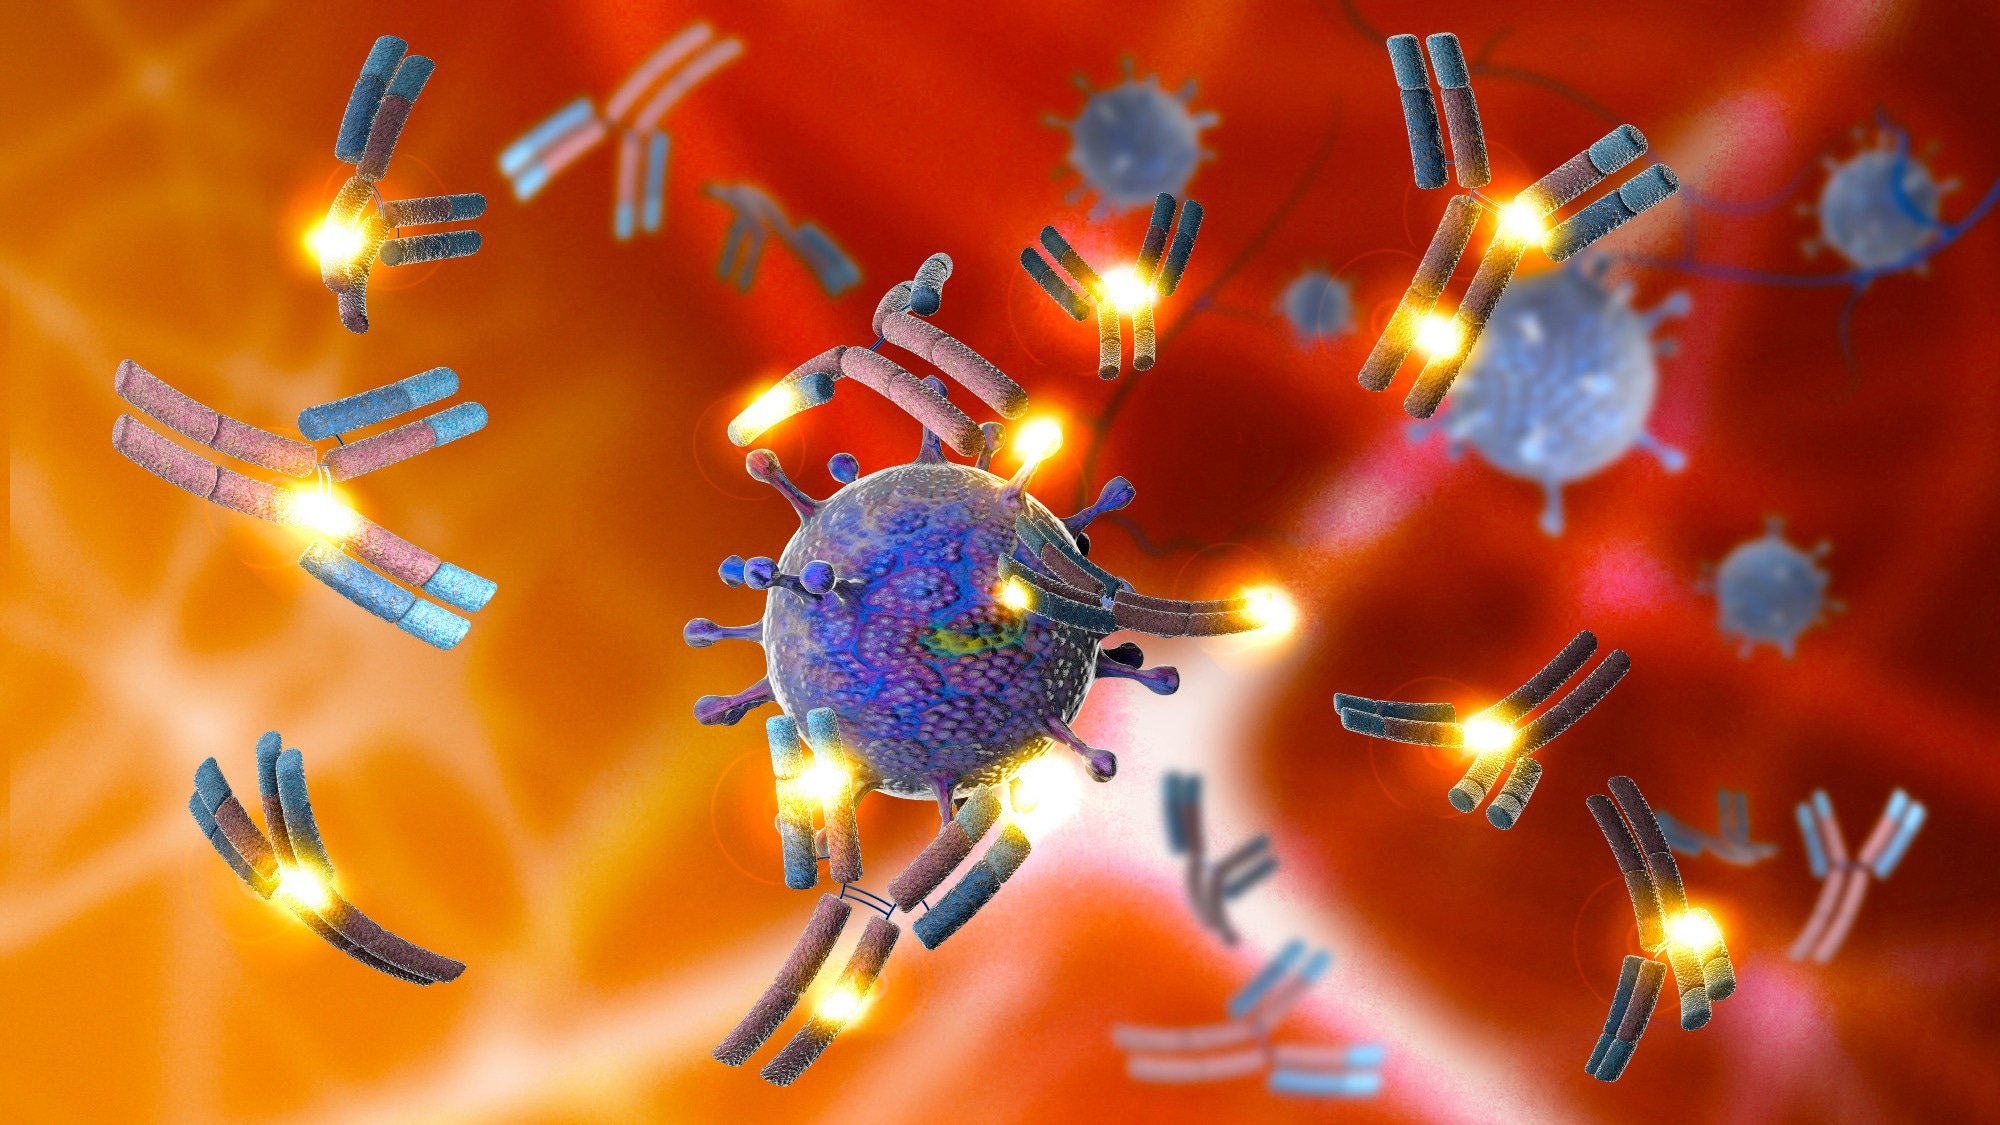 Study: Neutralizing monoclonal antibodies elicited by mosaic RBD nanoparticles bind conserved sarbecovirus epitopes. Image Credit: Naeblys / Shutterstock